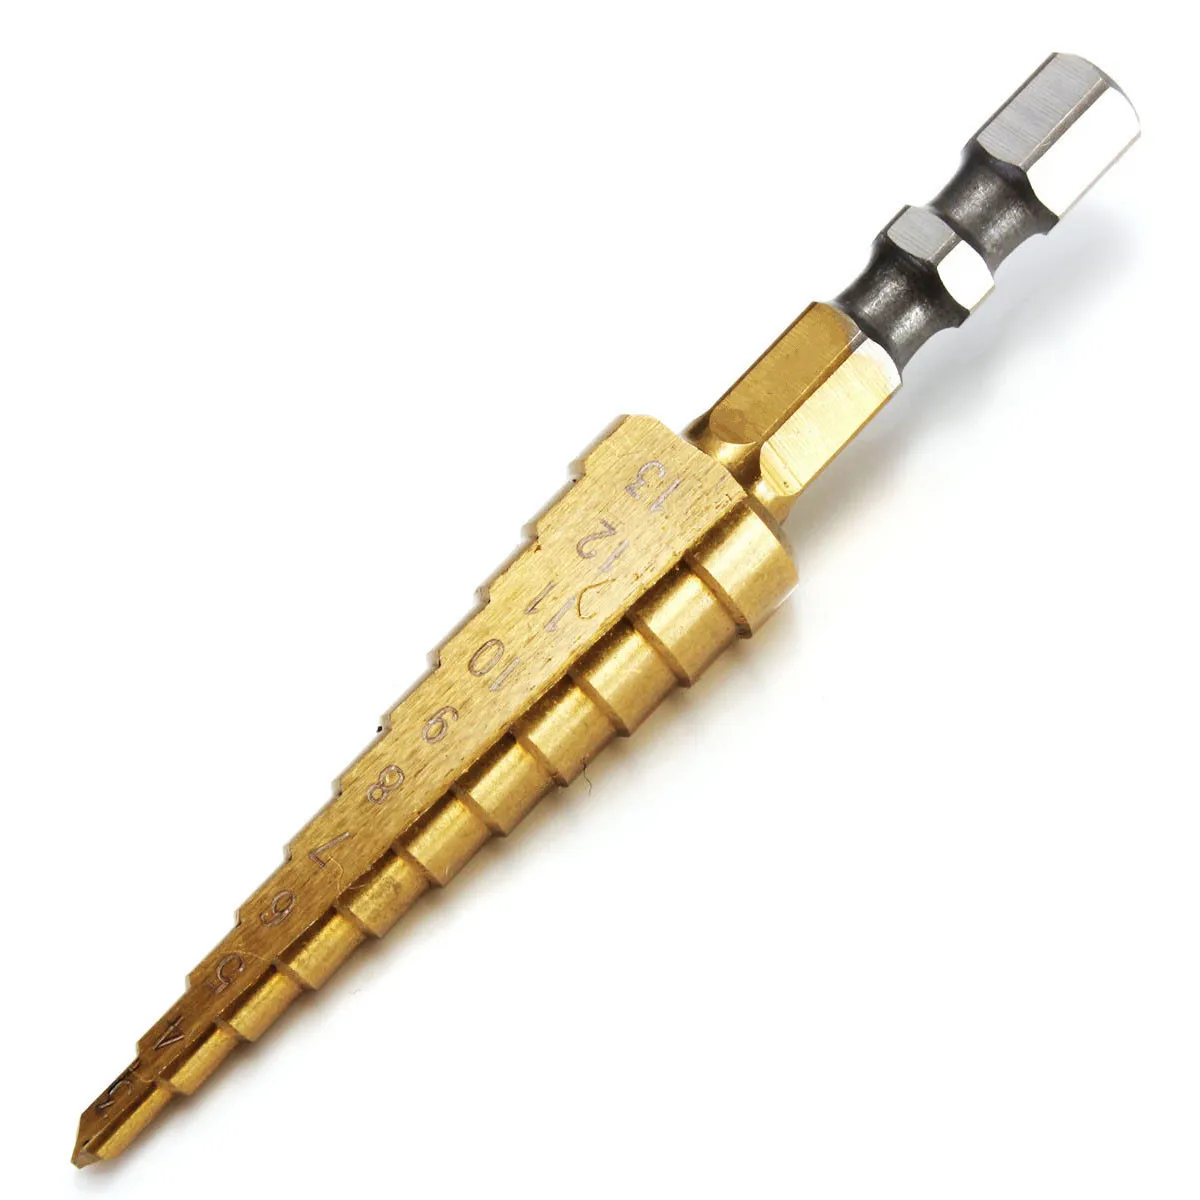 1PC 3-13mm HSS Titanium Coated Stepped Drill Power Tools Set Step Cone Cutting Tools Steel Woodworking Wood Metal Drilling